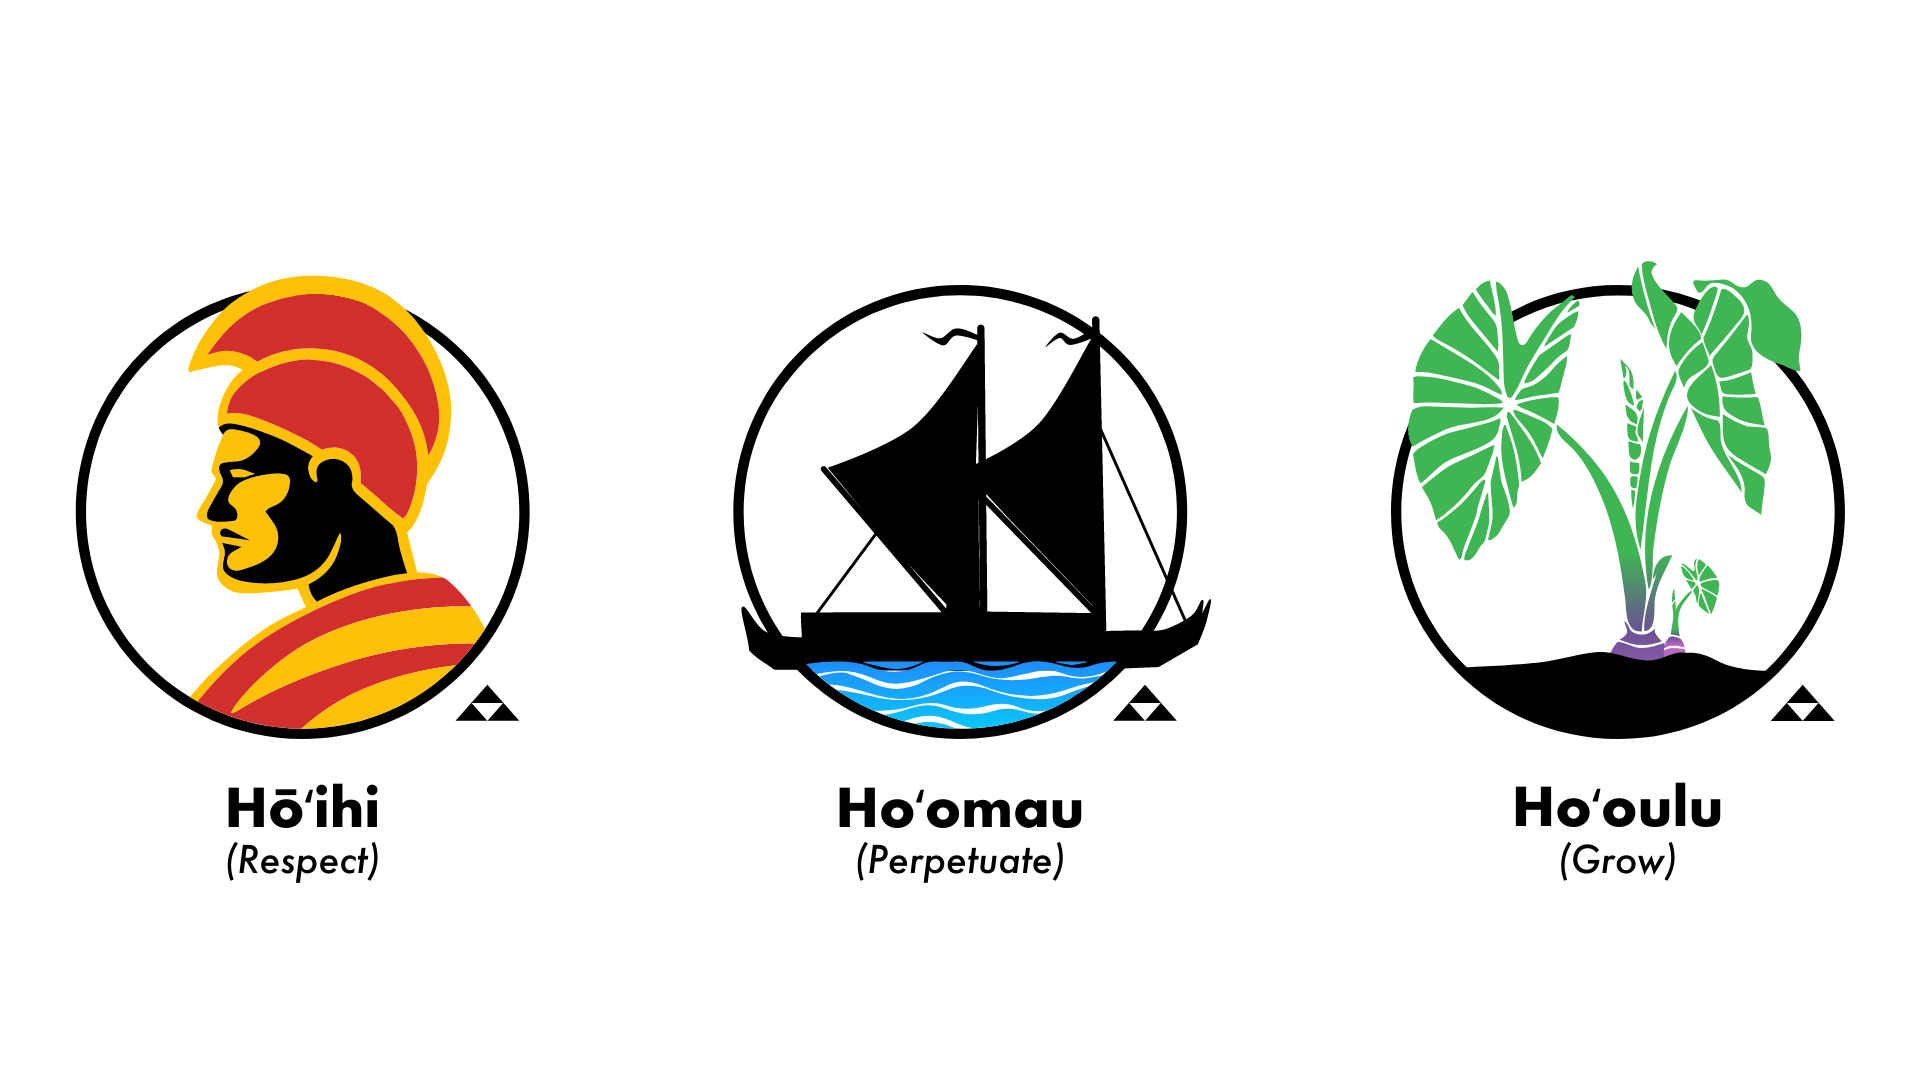 Maoli values of respect, perpetuate and grow